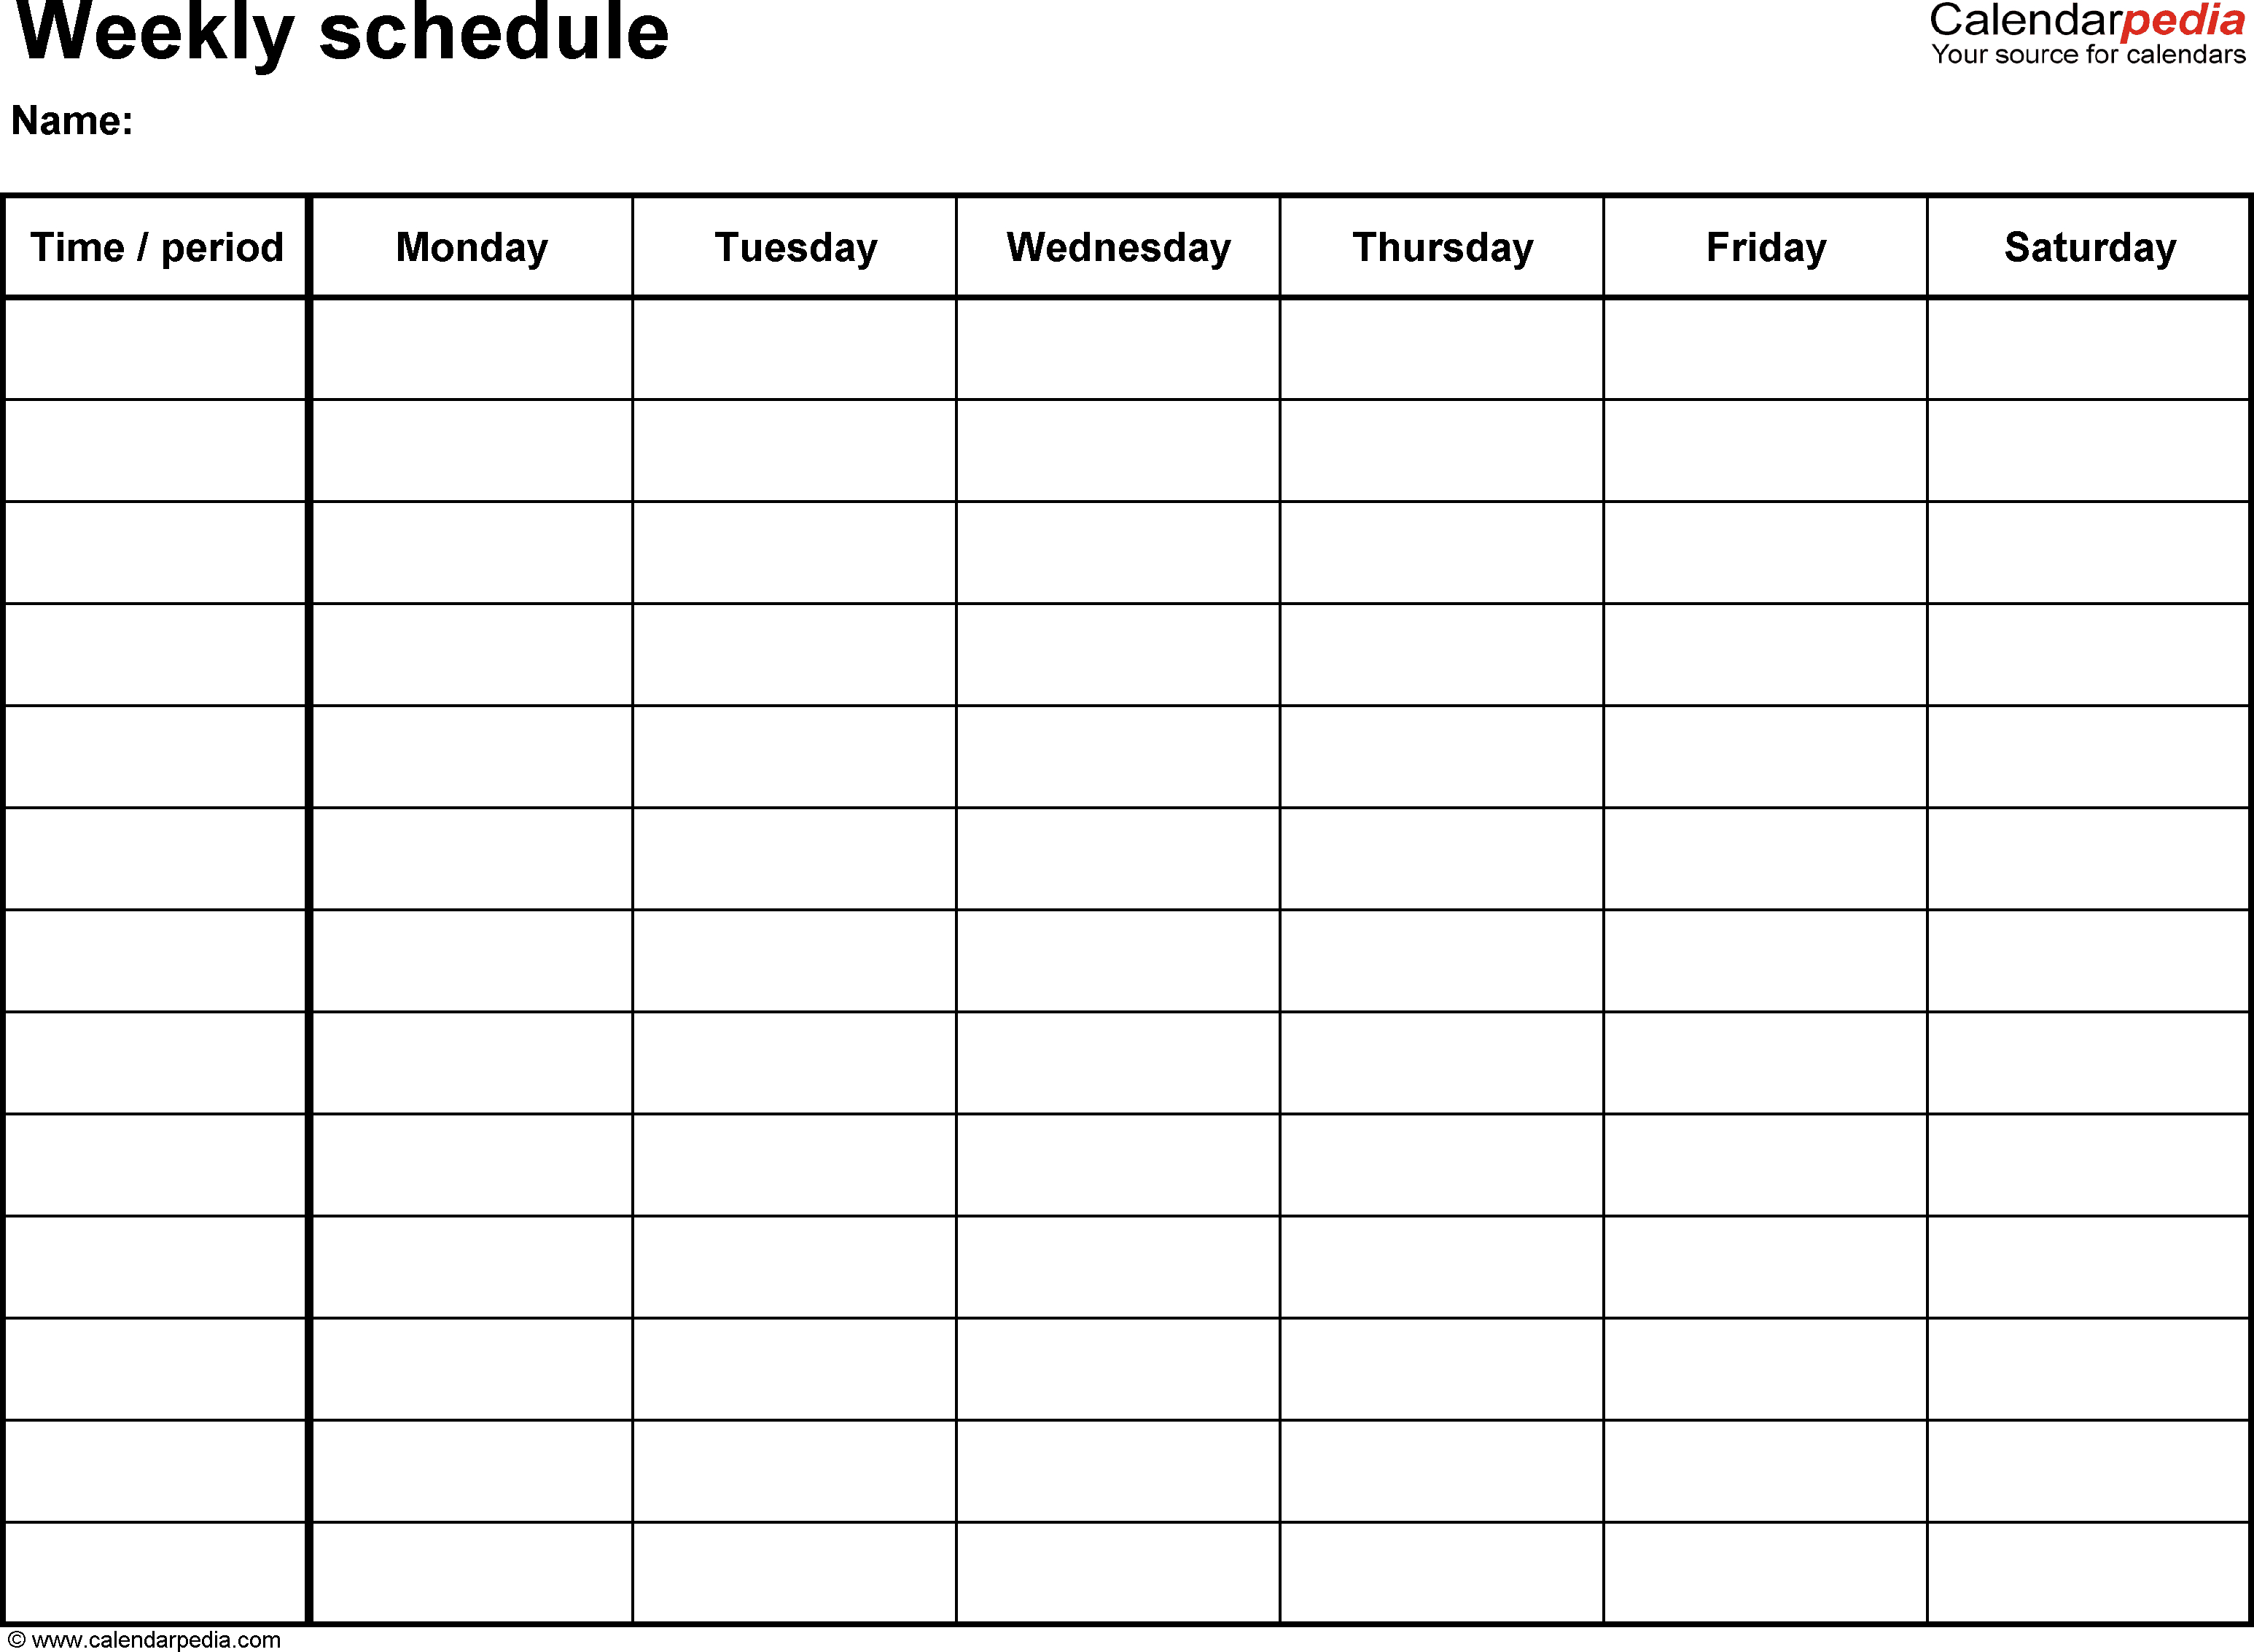 Free Weekly Schedule Templates For Word - 18 Templates - Free Printable Blank Weekly Schedule